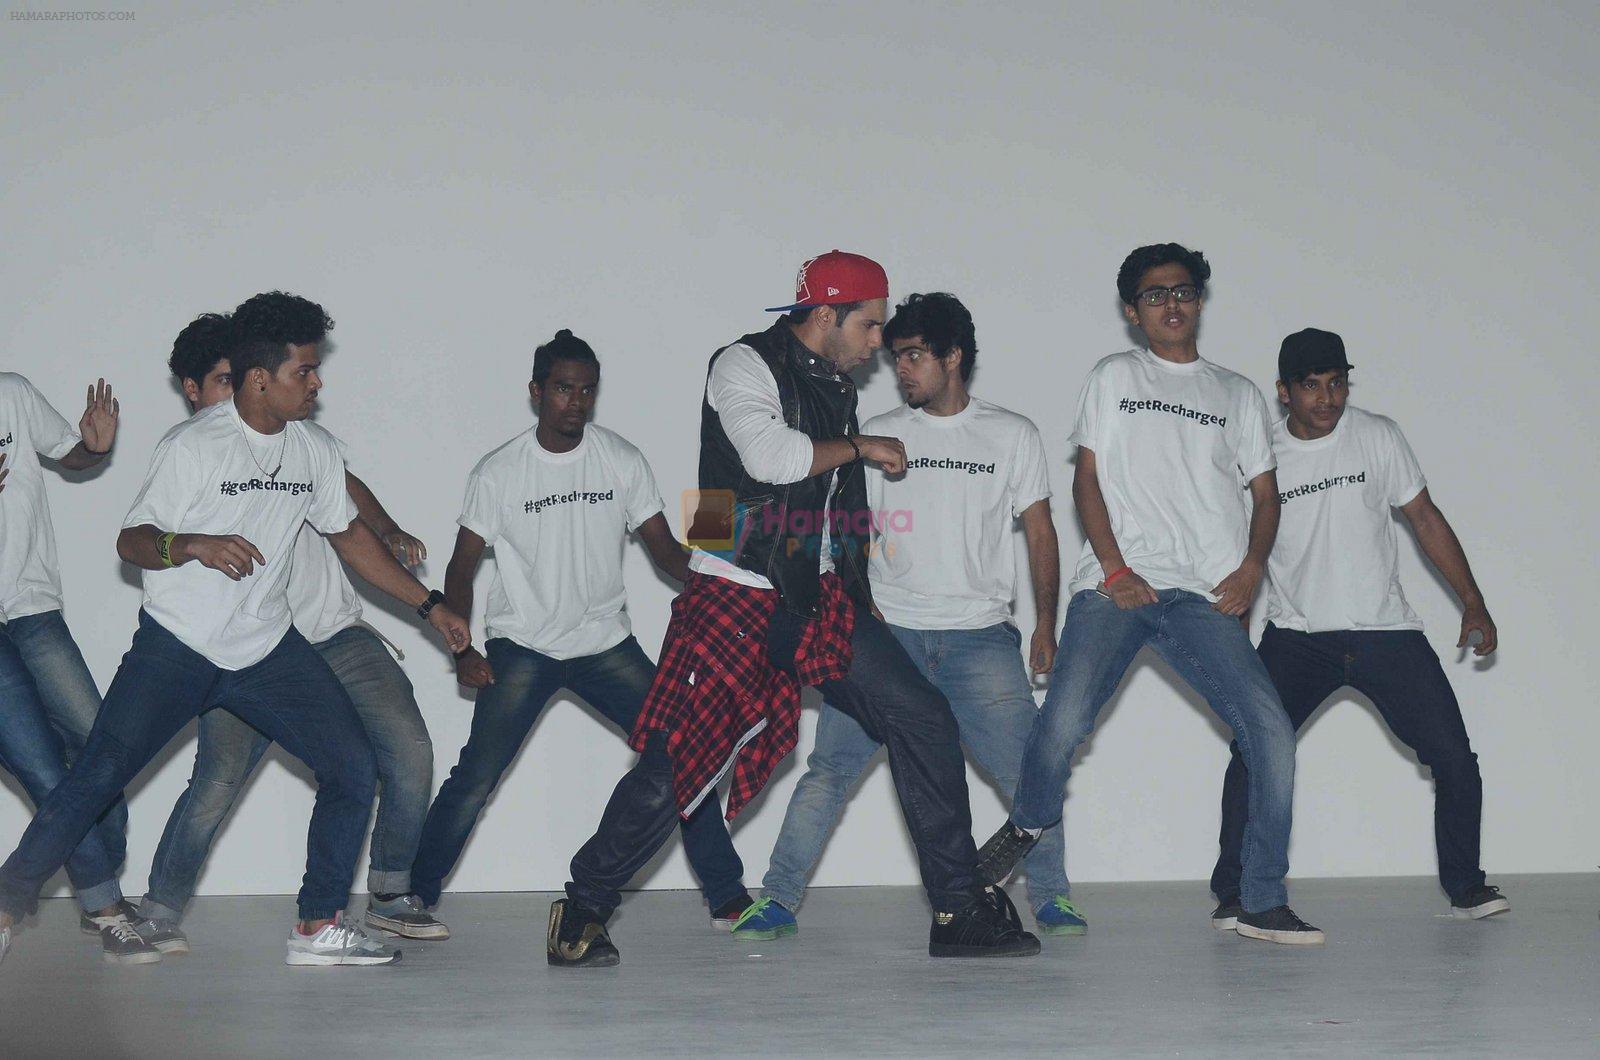 varun Dhawan's 4D music and dance performance in association with Pond's men and ABCD 2 in Byculla on 7th June 2015